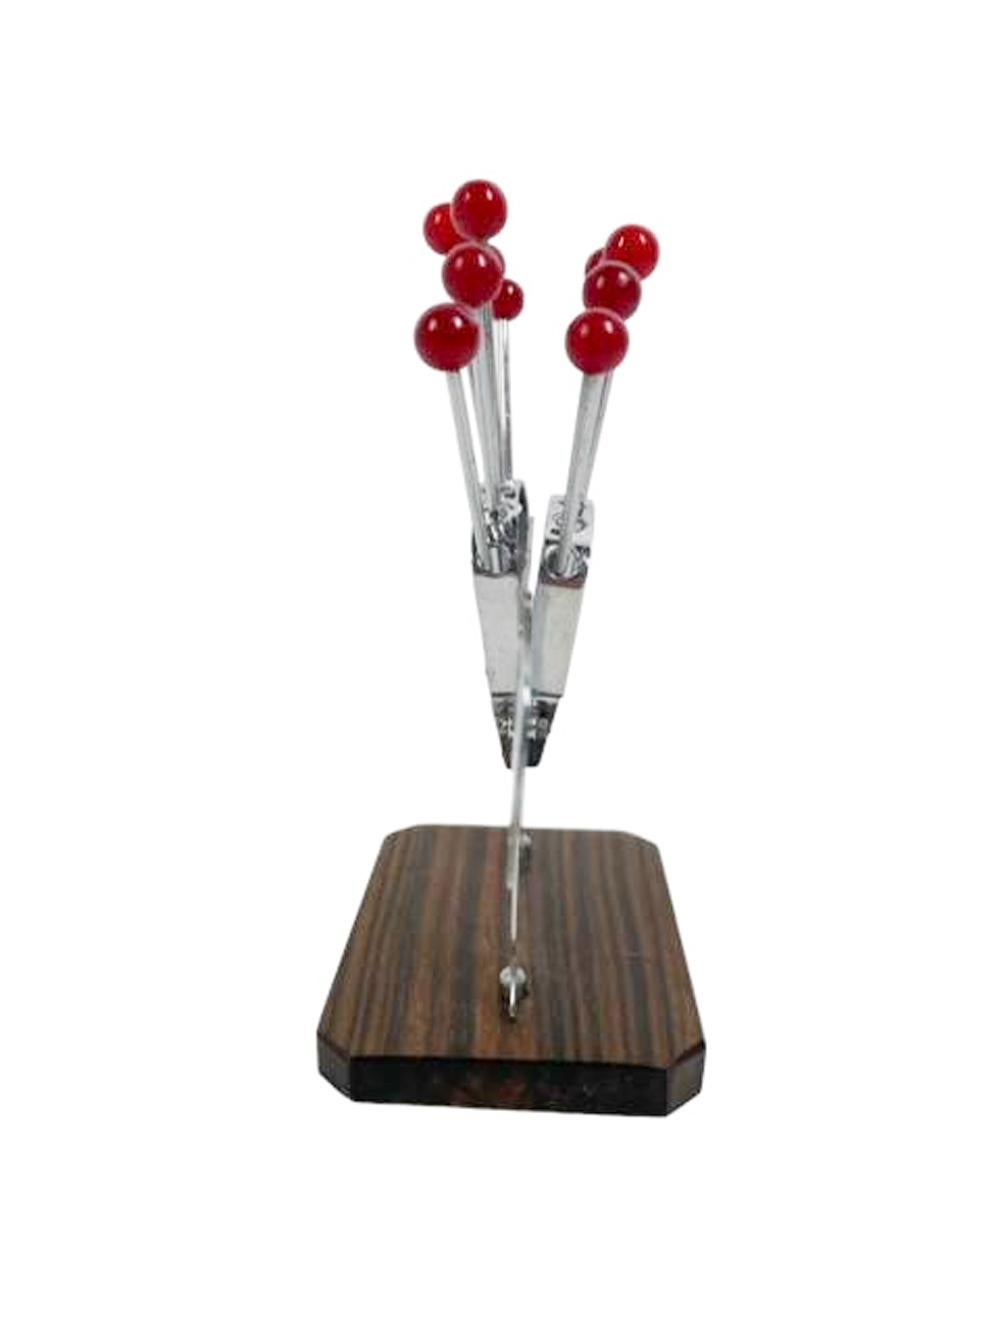 20th Century Art Deco Elephant Cocktail Pick Set in Chrome and Wood w/12 Red Ball Top Picks For Sale